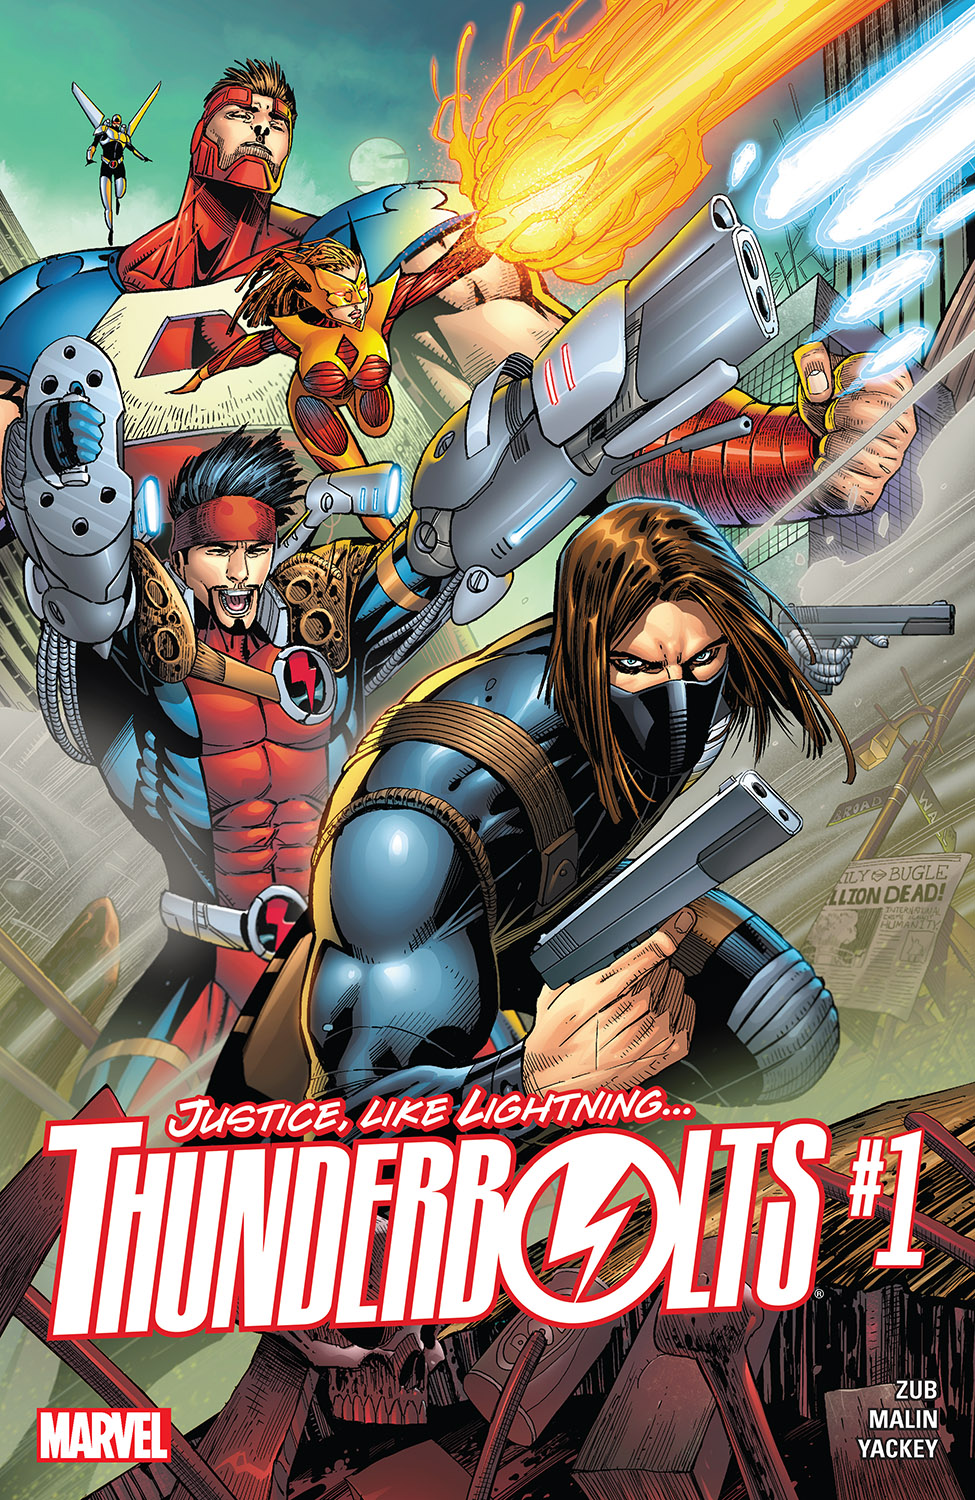 Winter Soldier's Thunderbolts